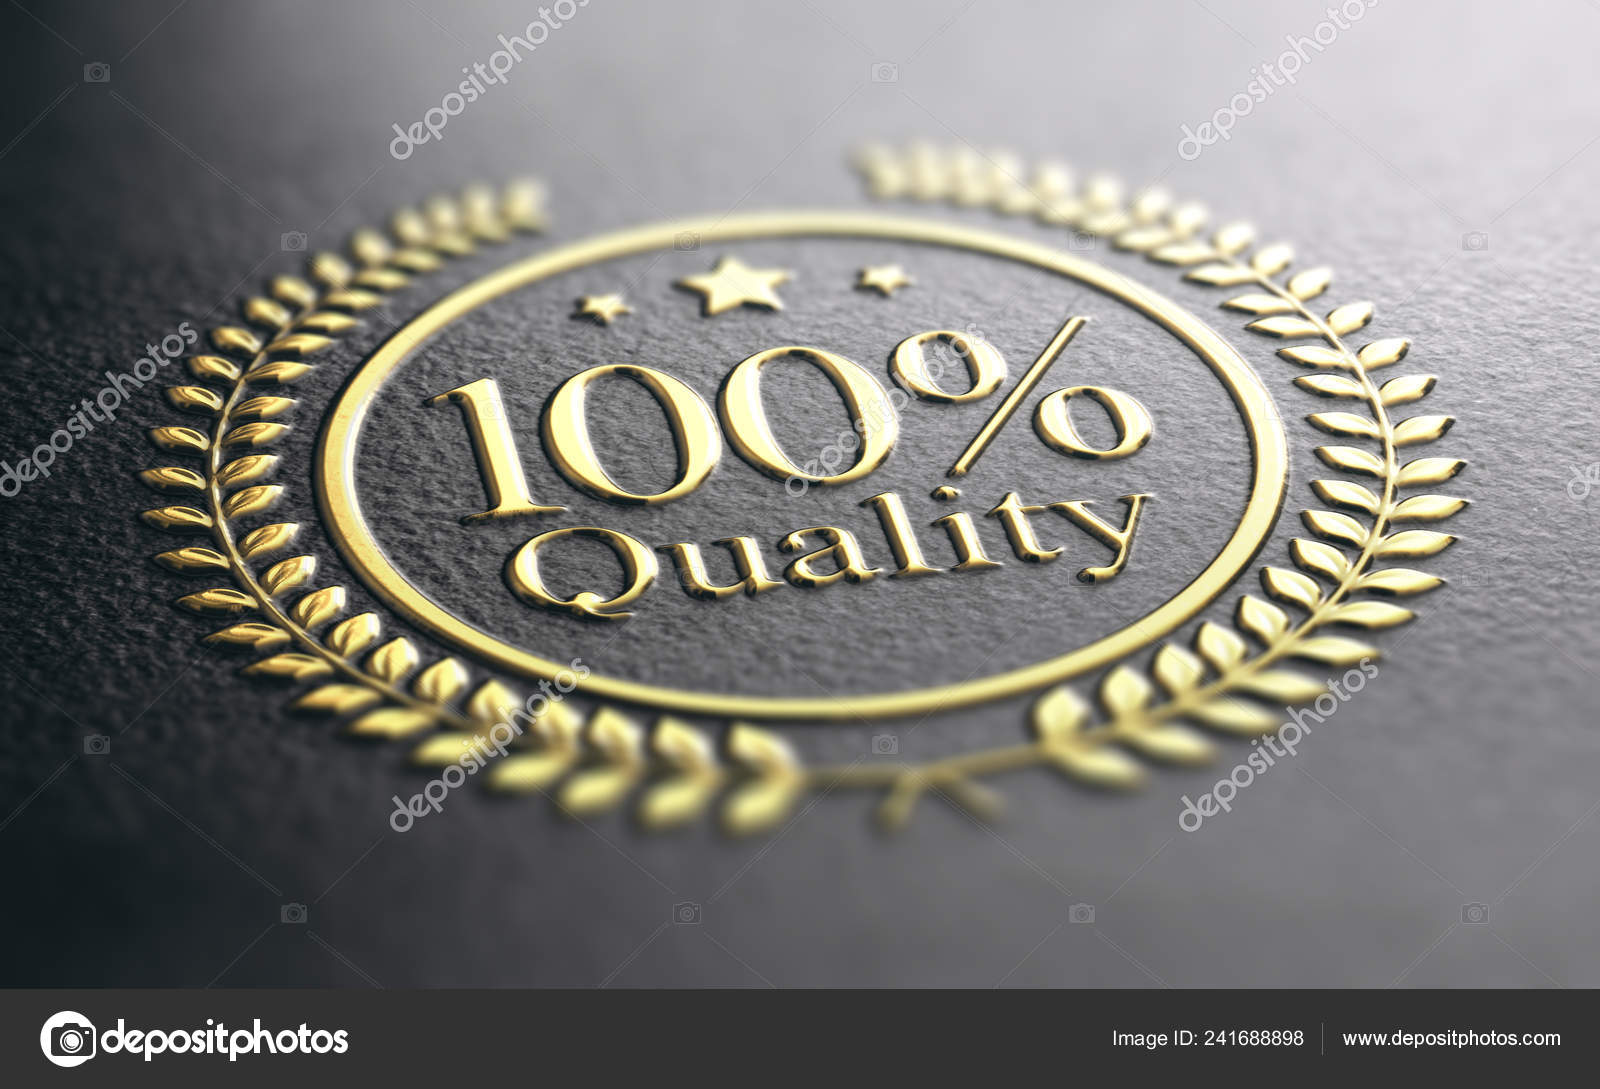 Premium Photo  Rubber stamp over white background with five stars printed  on it. concept image for illustration of high customer experience and  quality level.